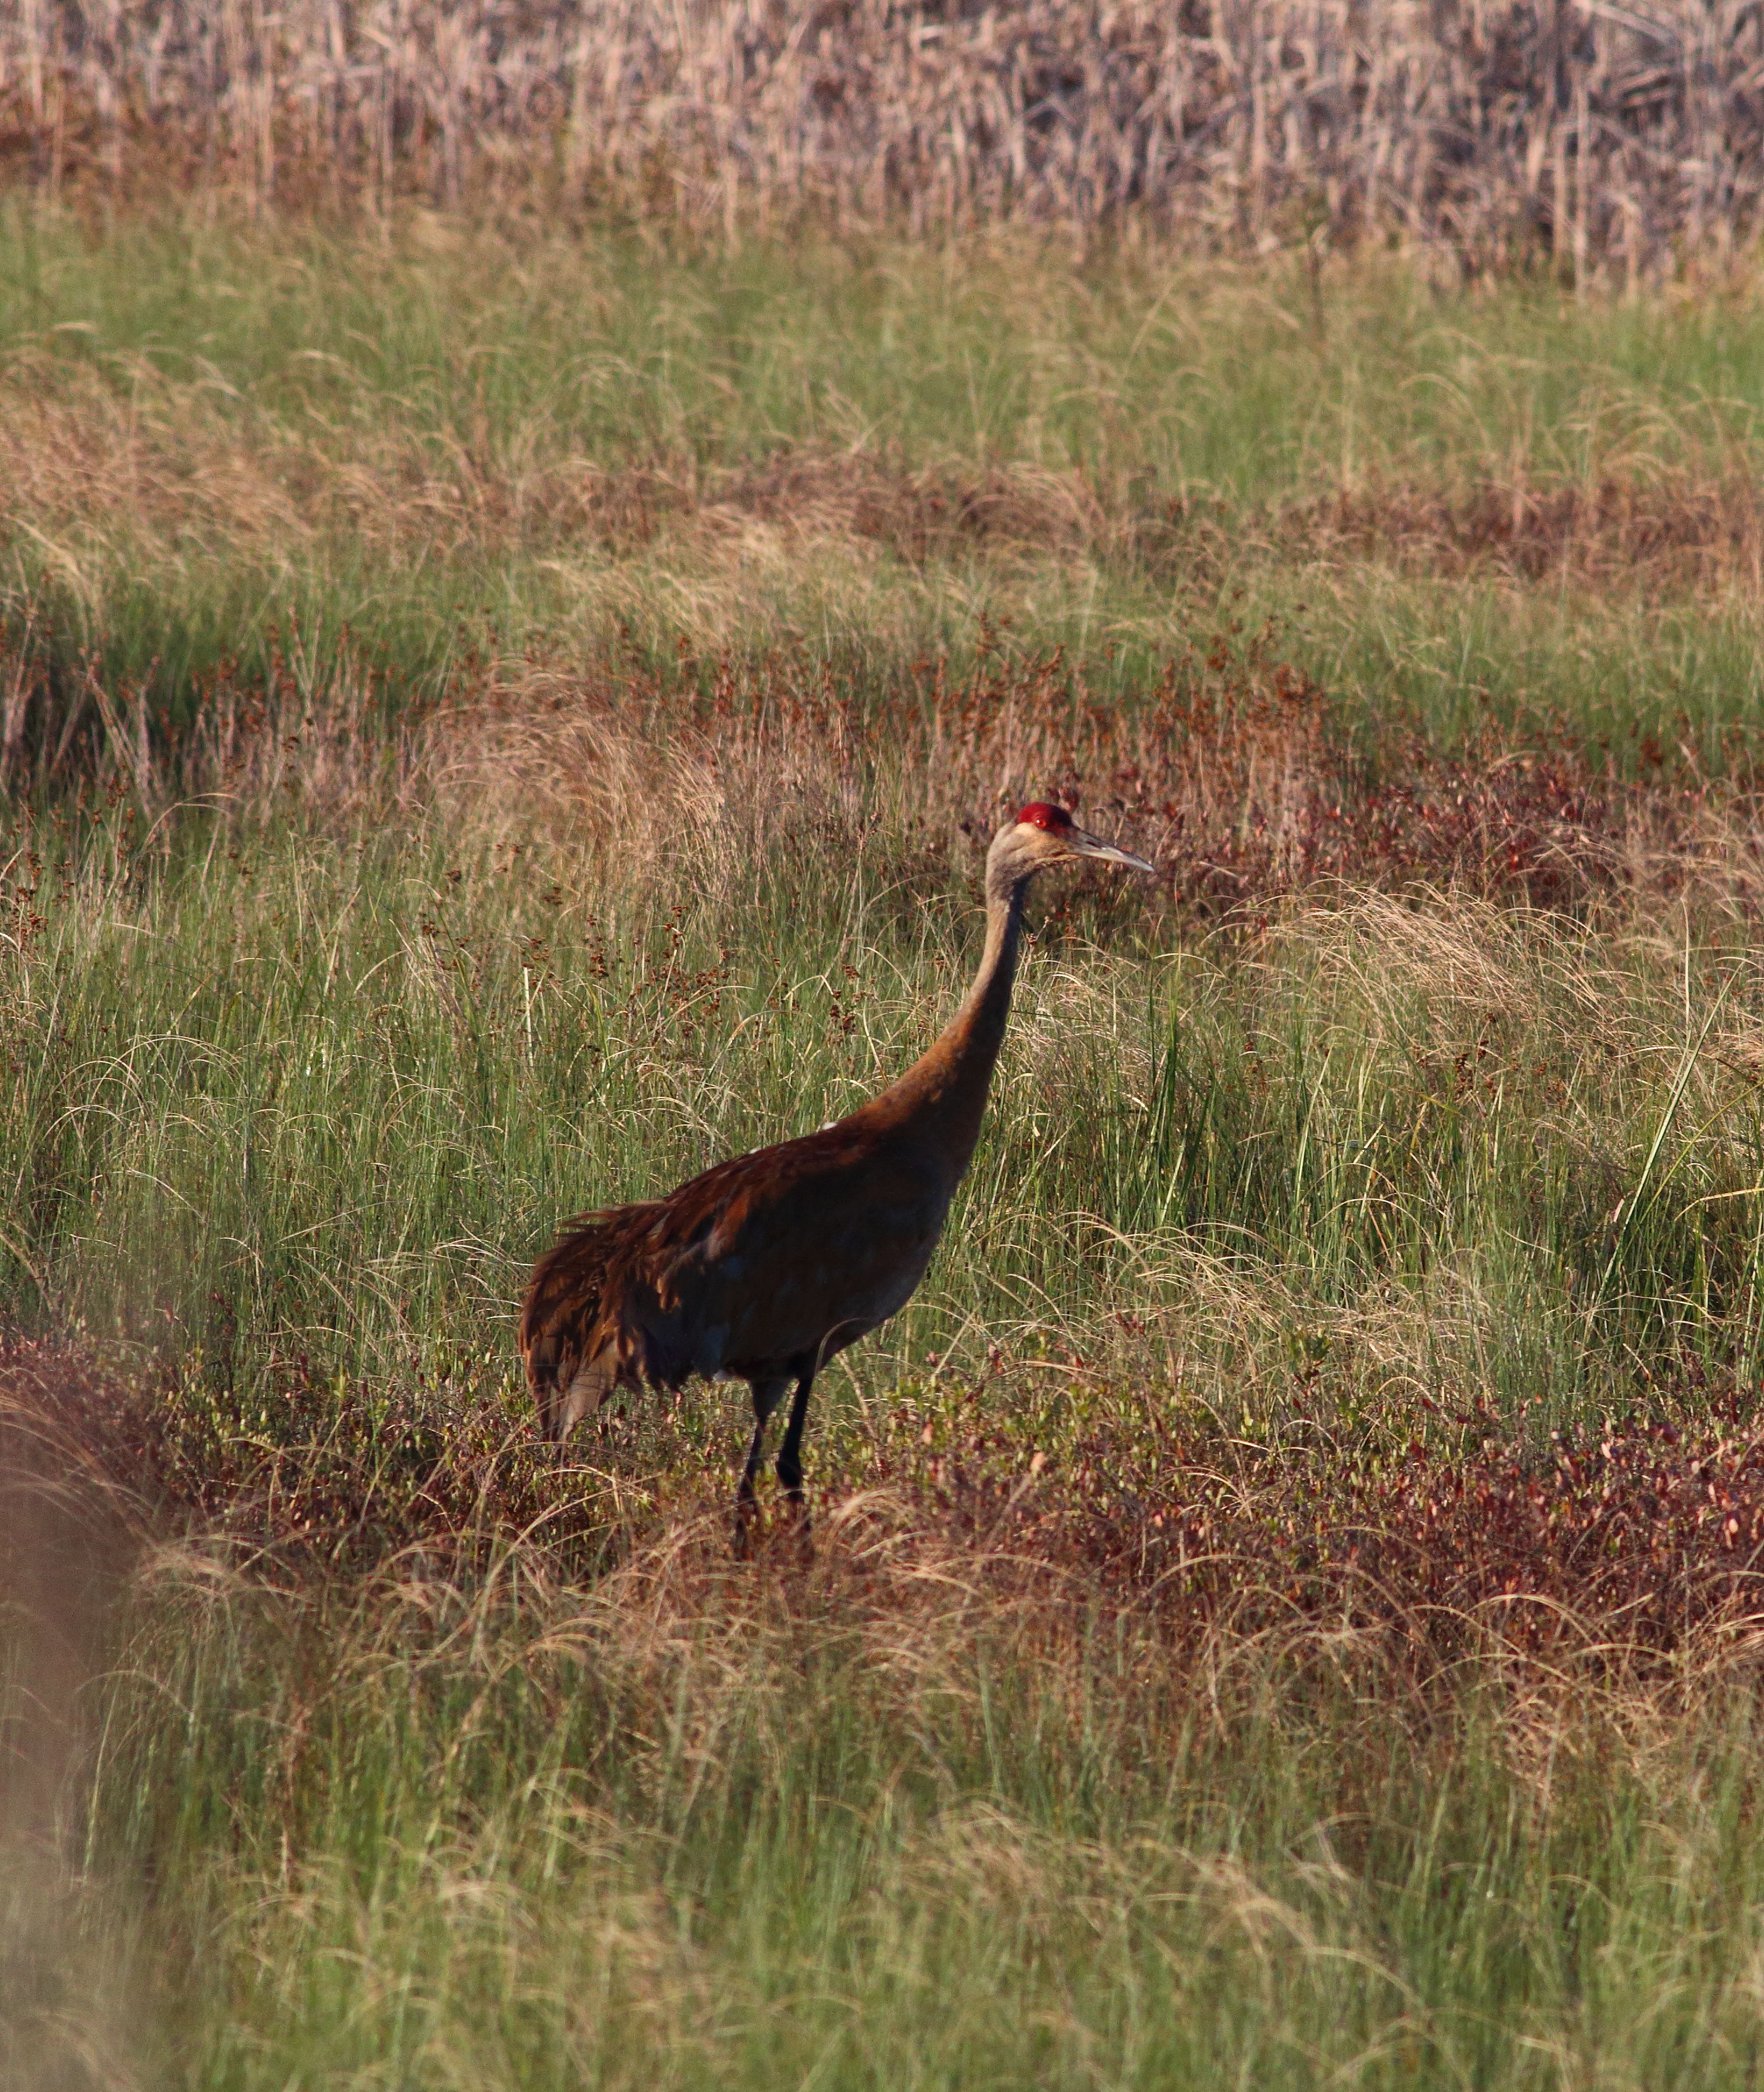 Crex Meadows is home to many nesting pairs of Sandhill Cranes each summer. Photo by Bruce Beehler